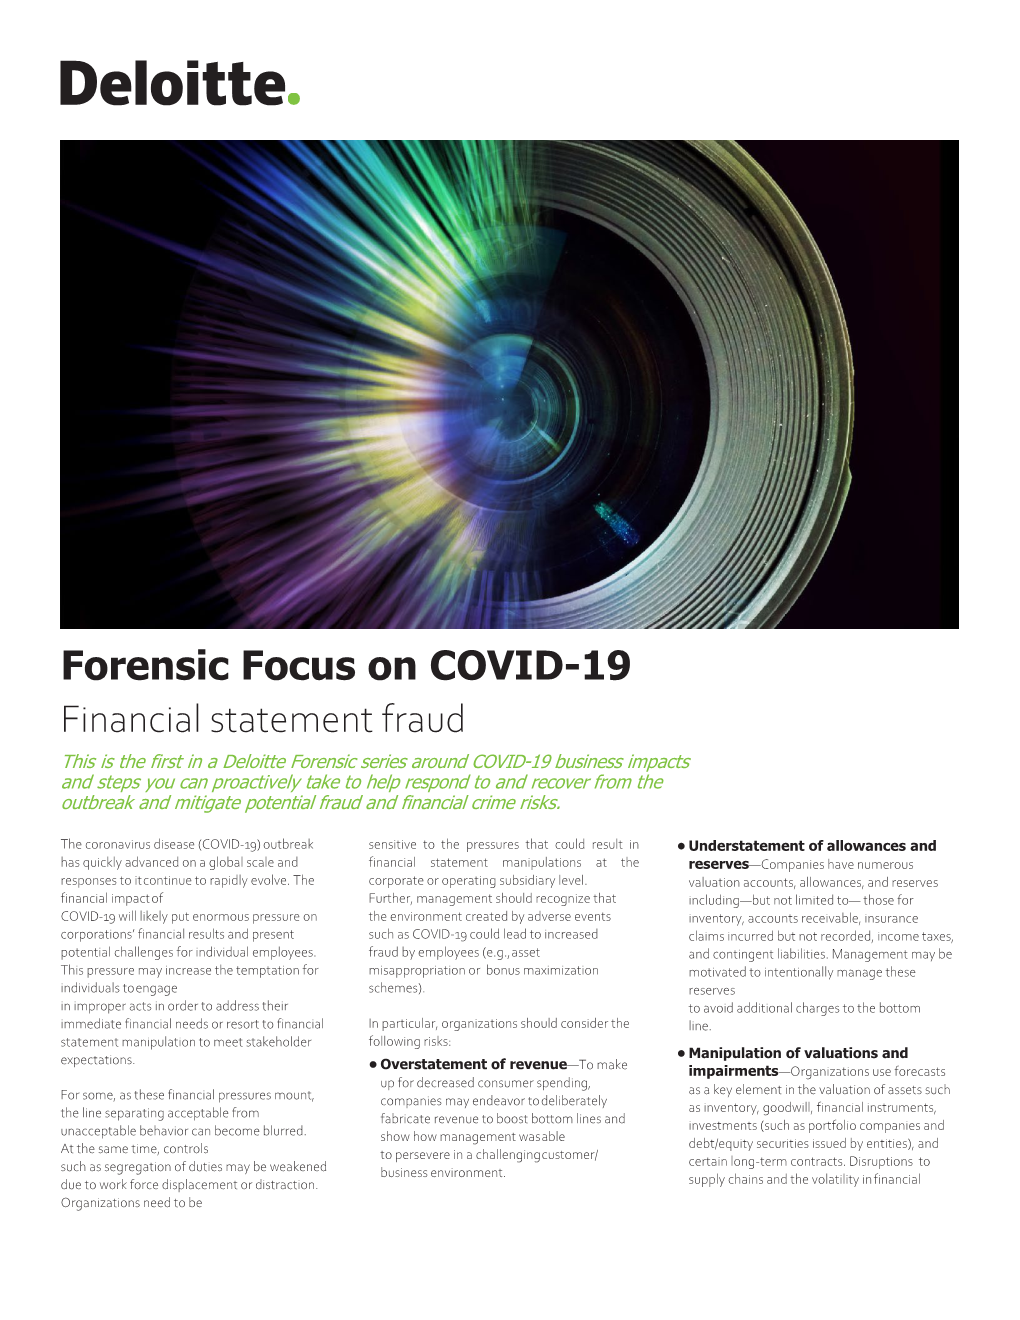 Forensic Focus on COVID-19 Financial Statement Fraud